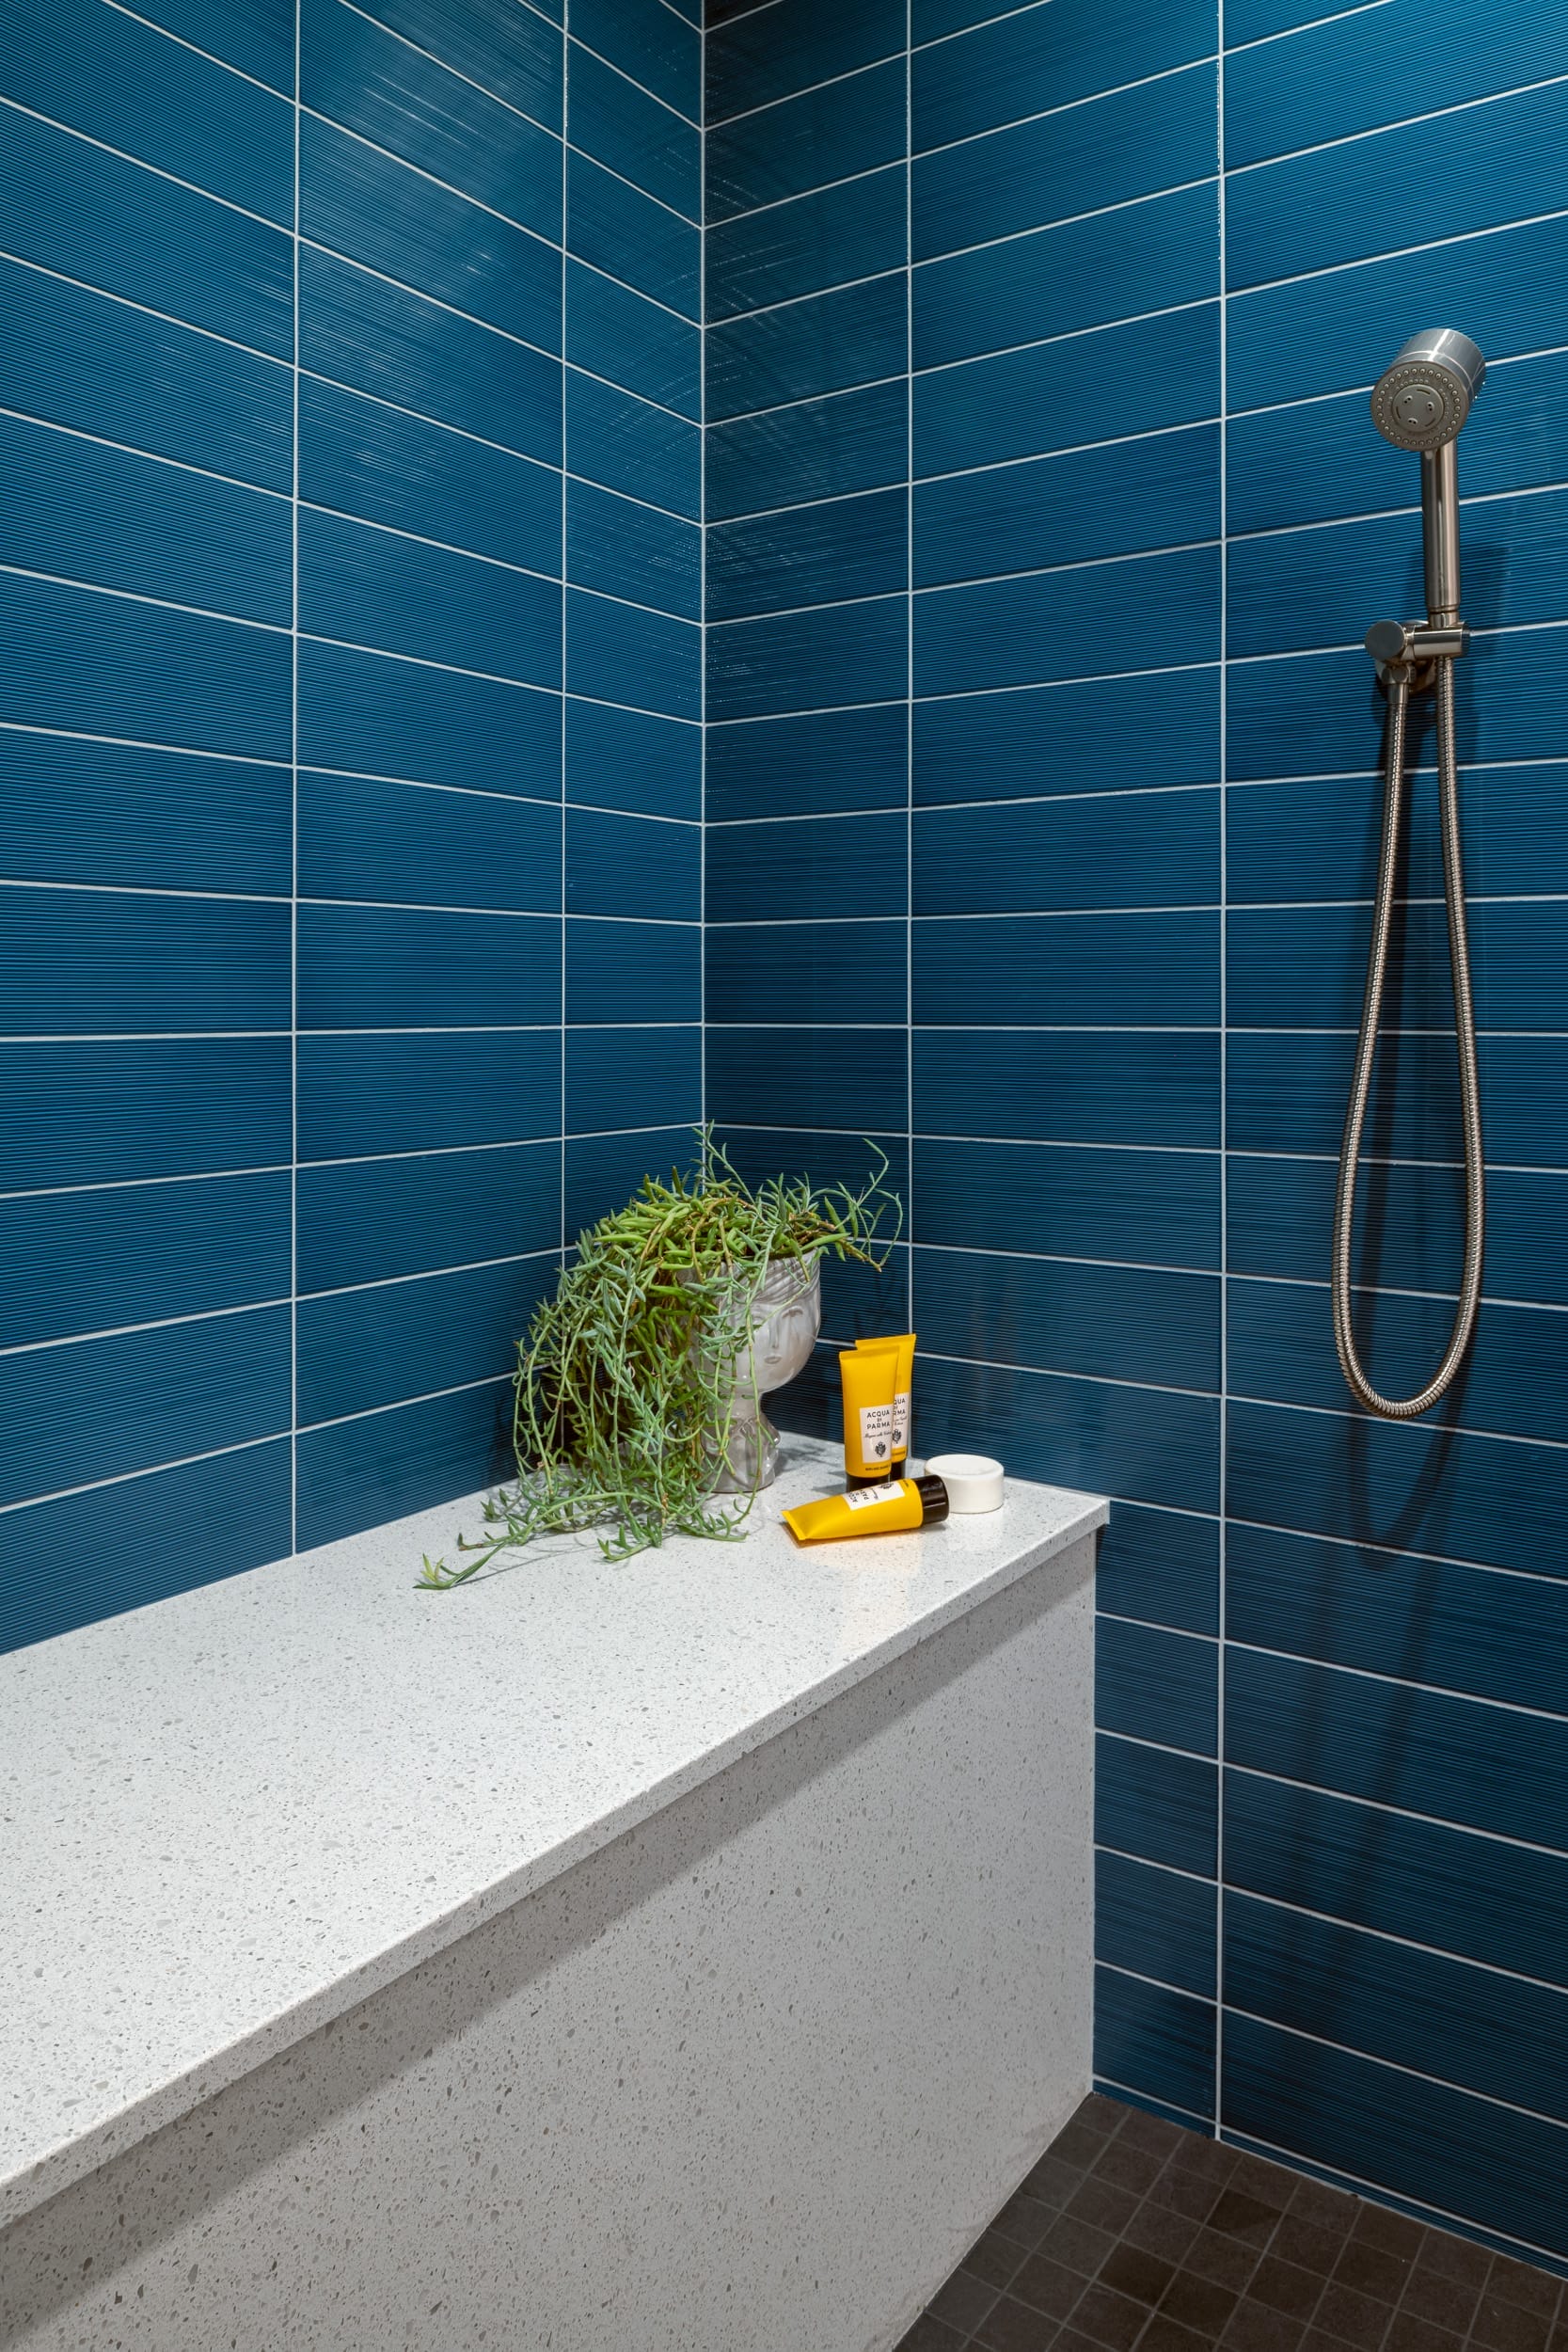 A blue tiled shower with a plant on the counter.